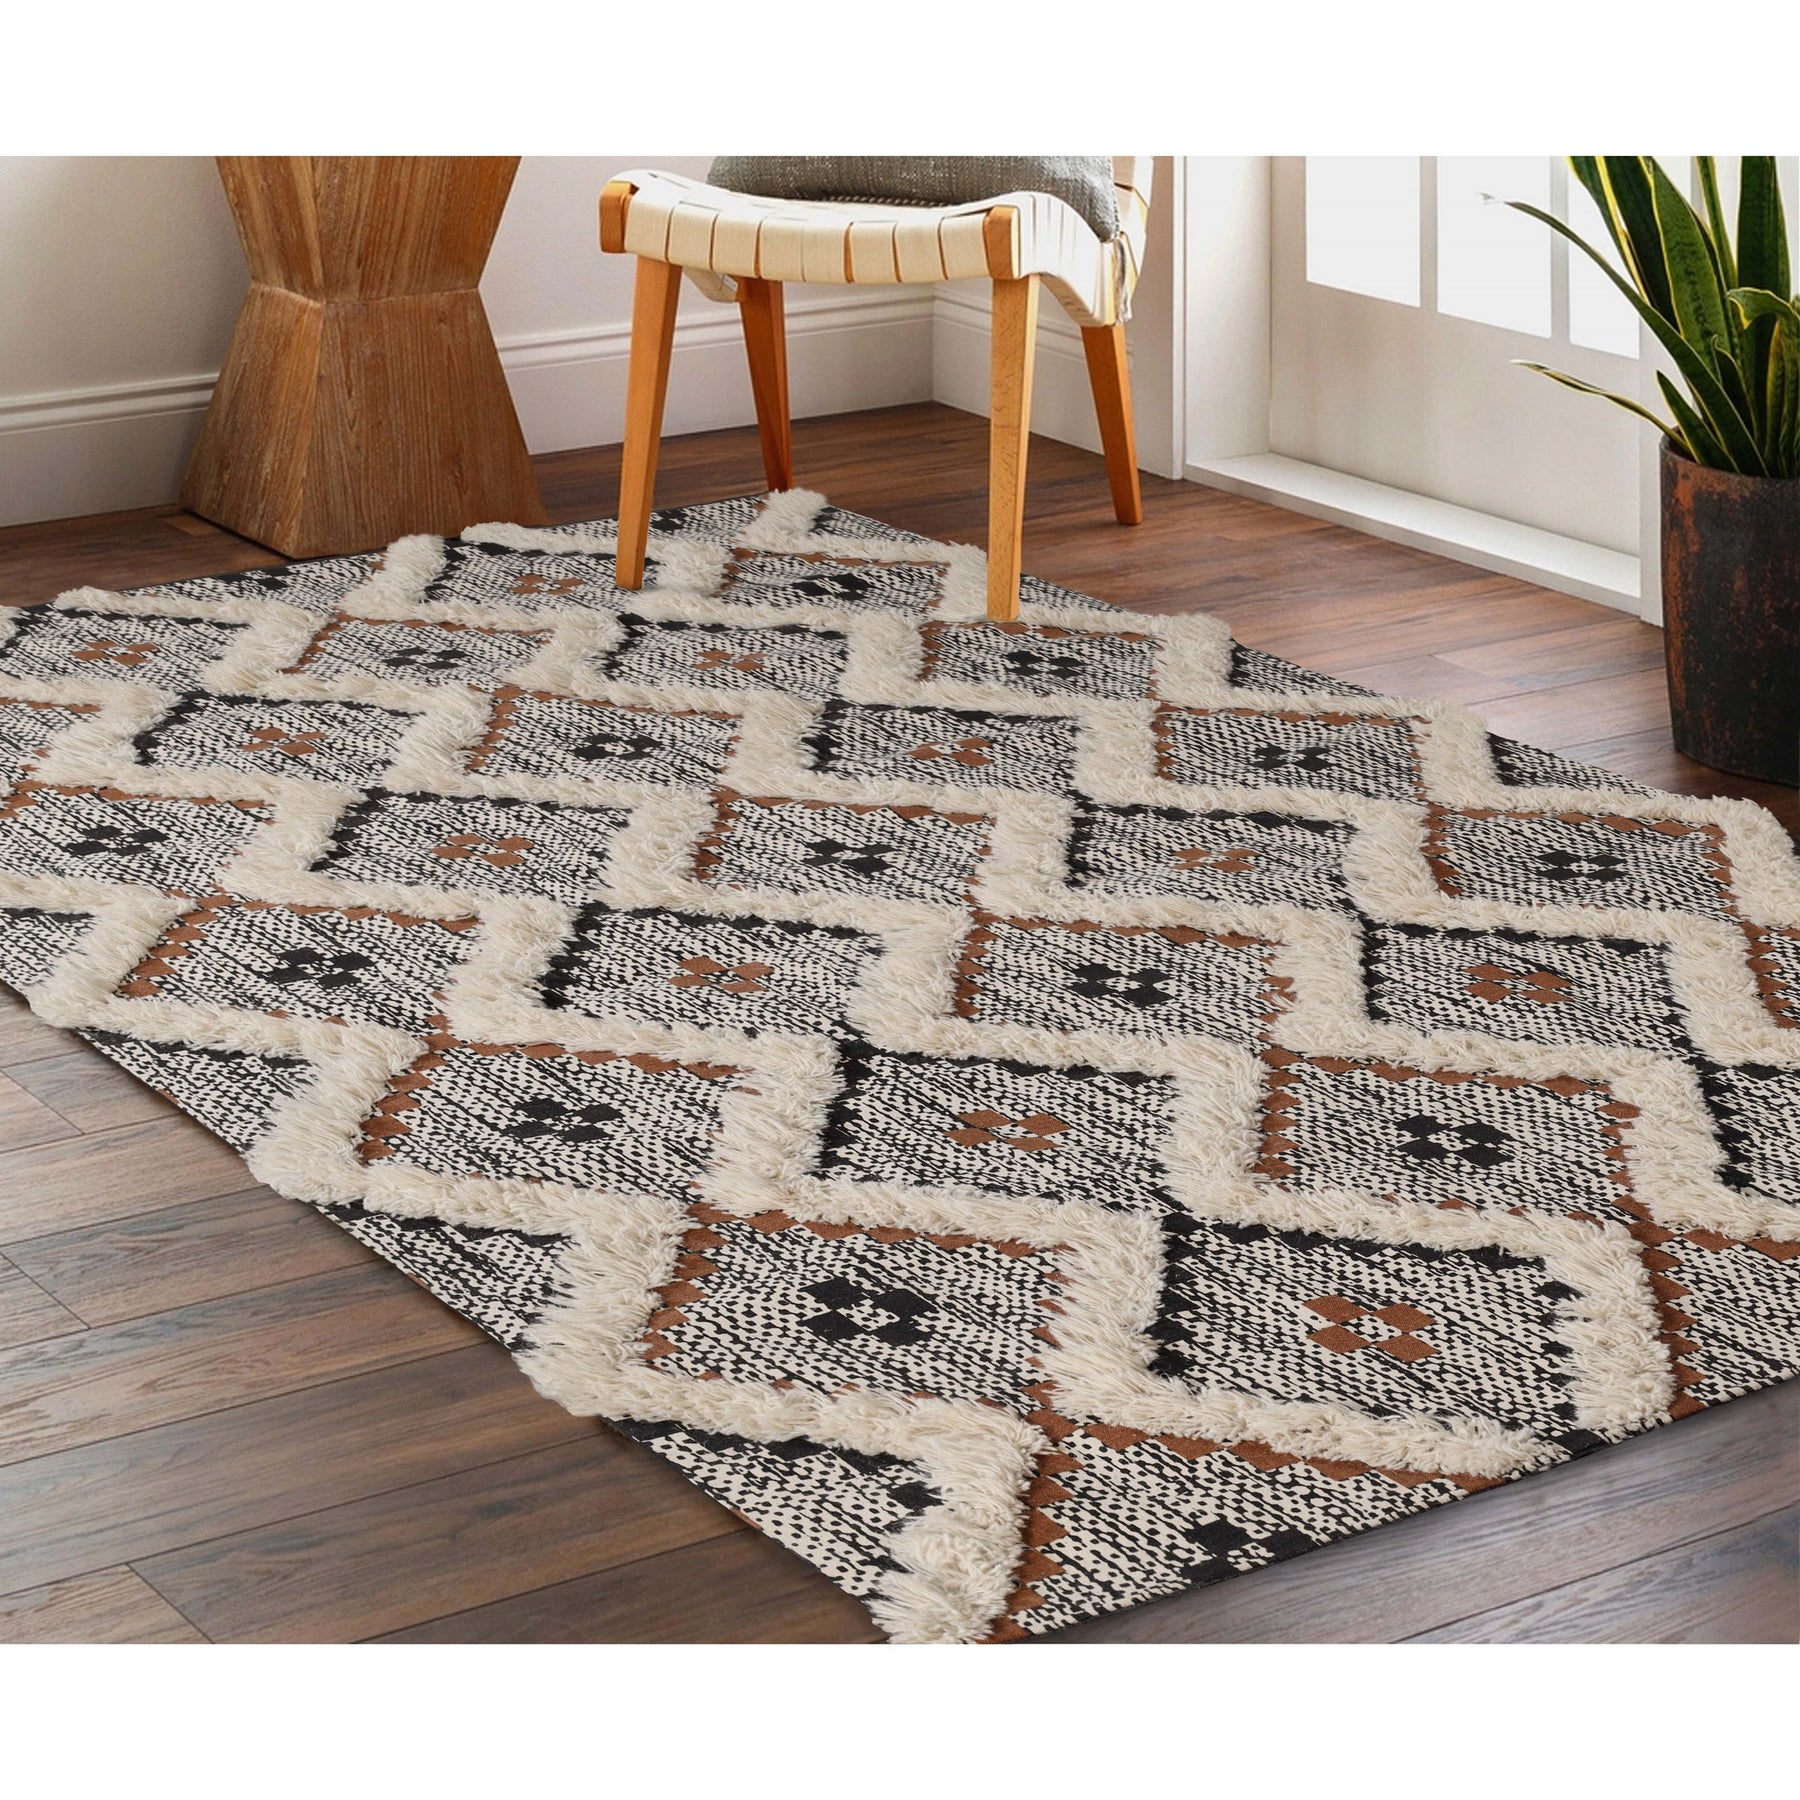 Superior Indoor Area Rug Collection Geometric Design with Cotton-Latex Backing - Rust-Black